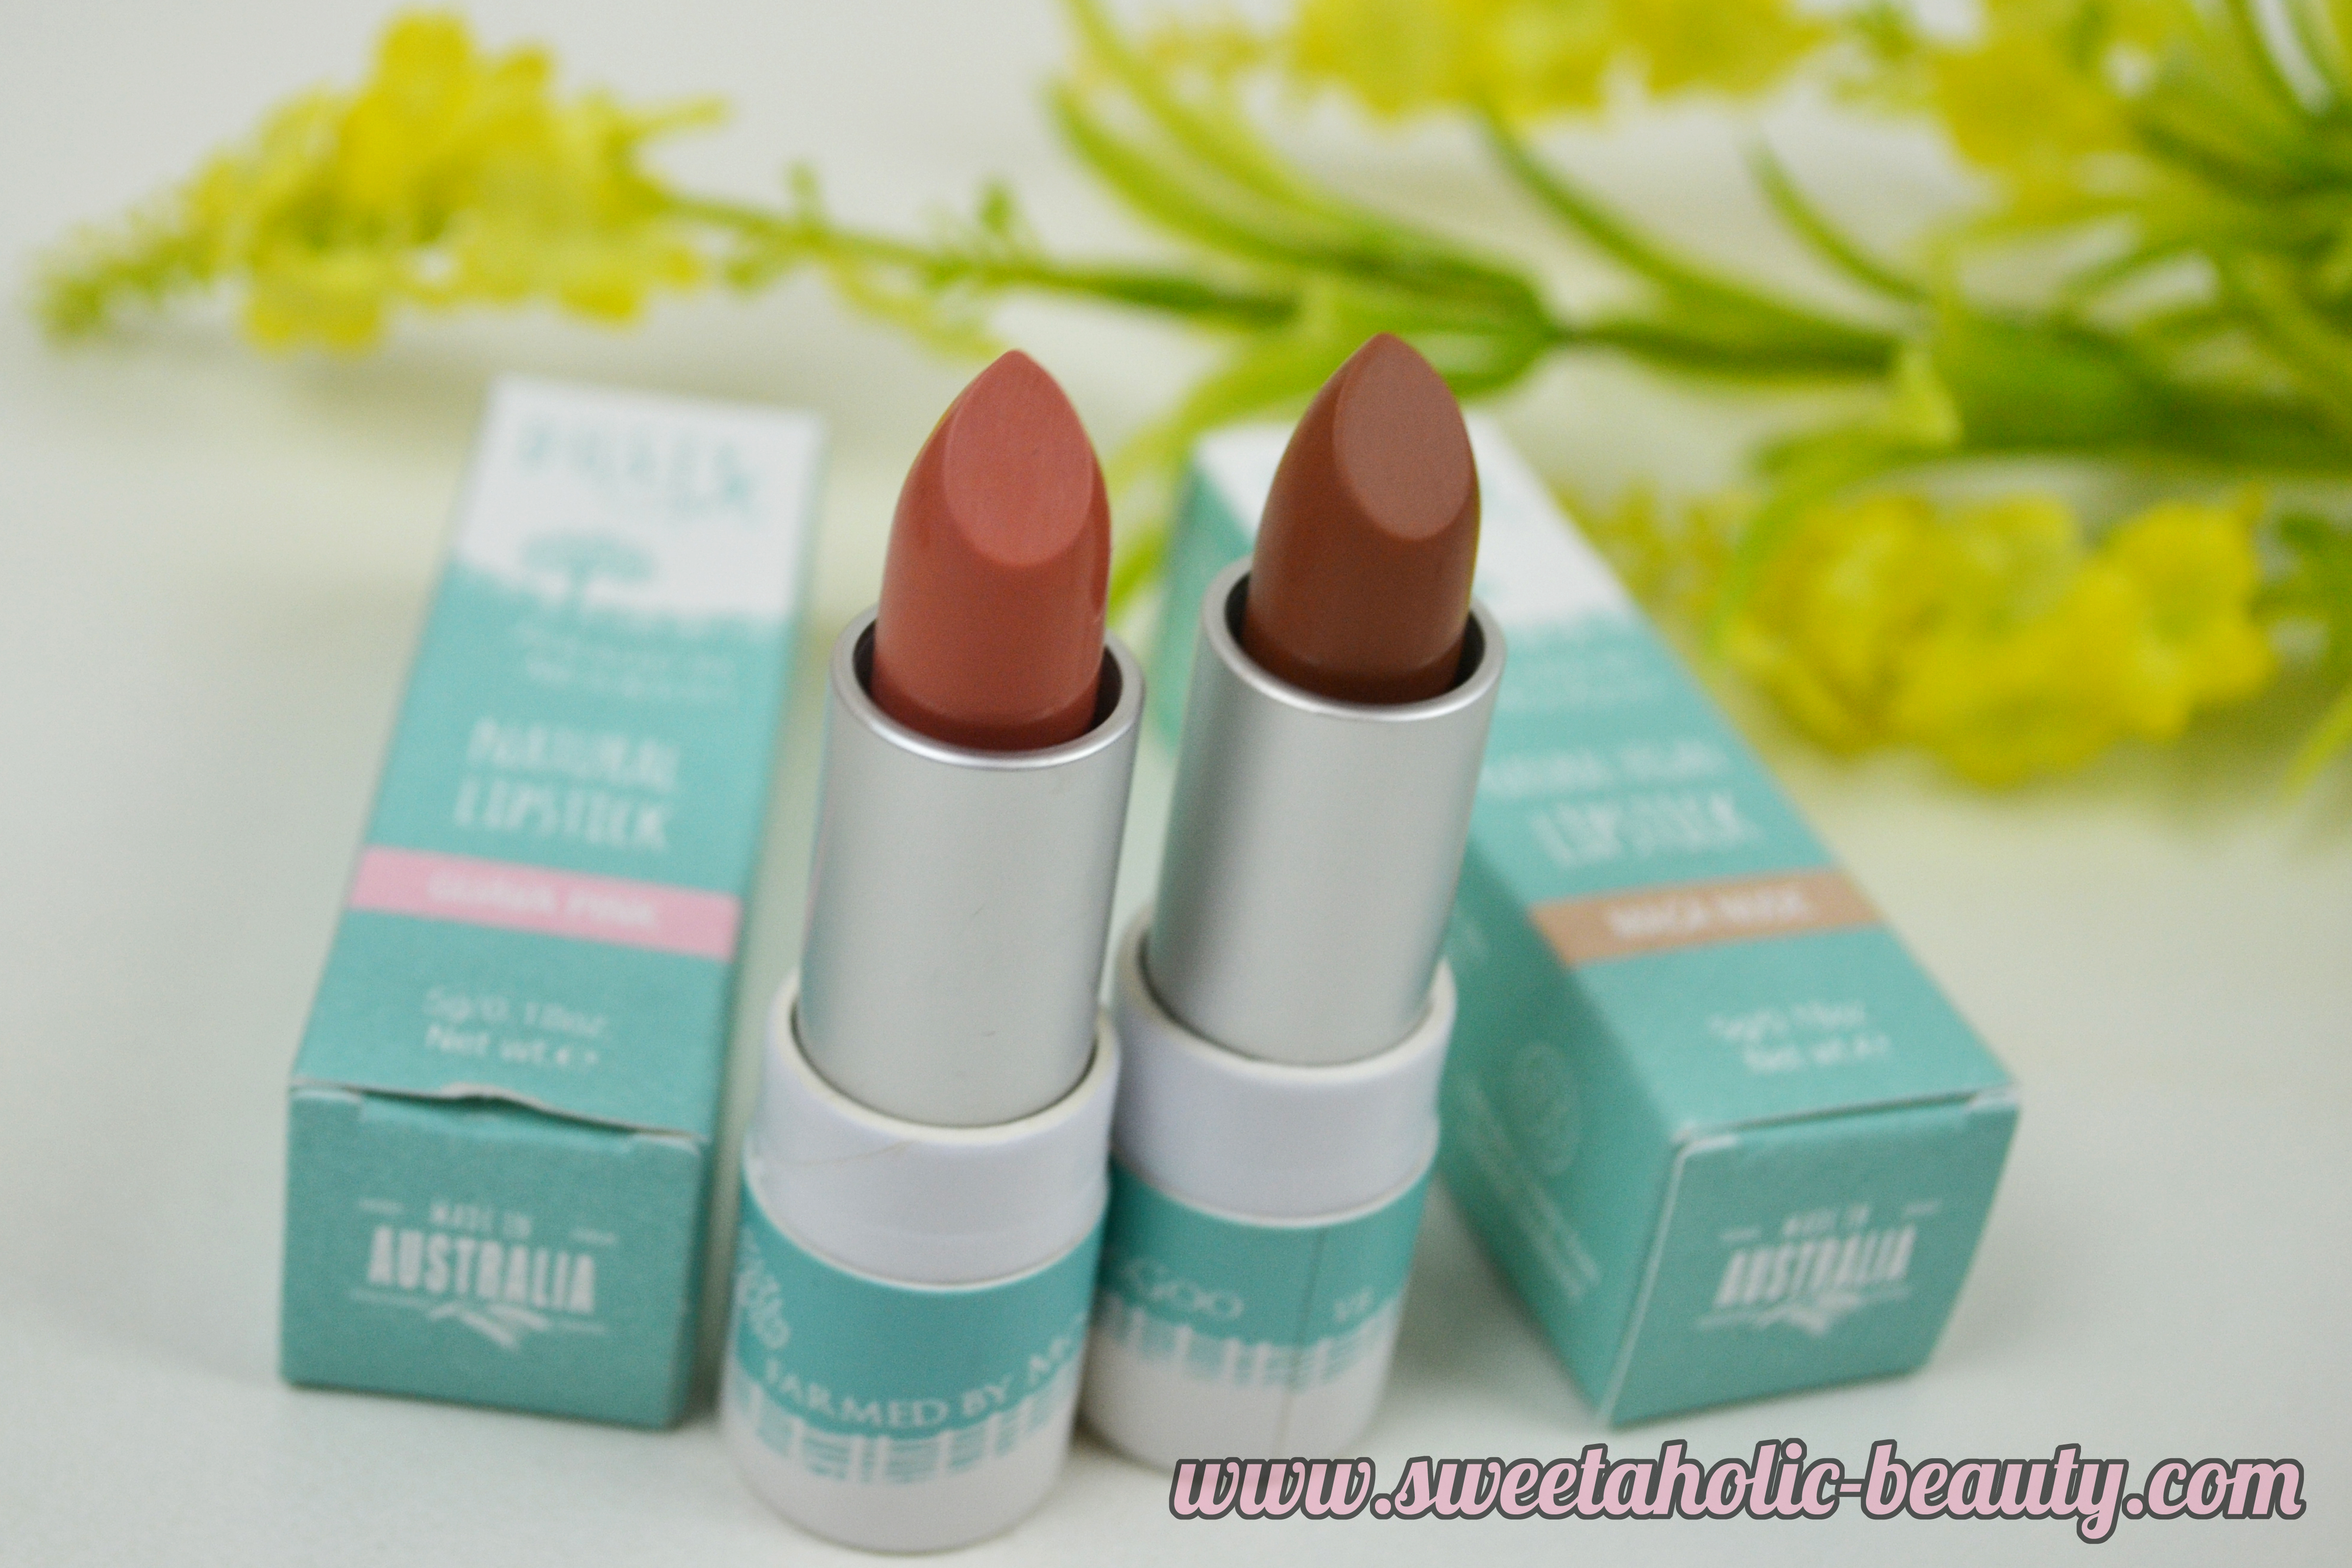 Dusty Girls Brand Focus Review & Swatches - Sweetaholic Beauty